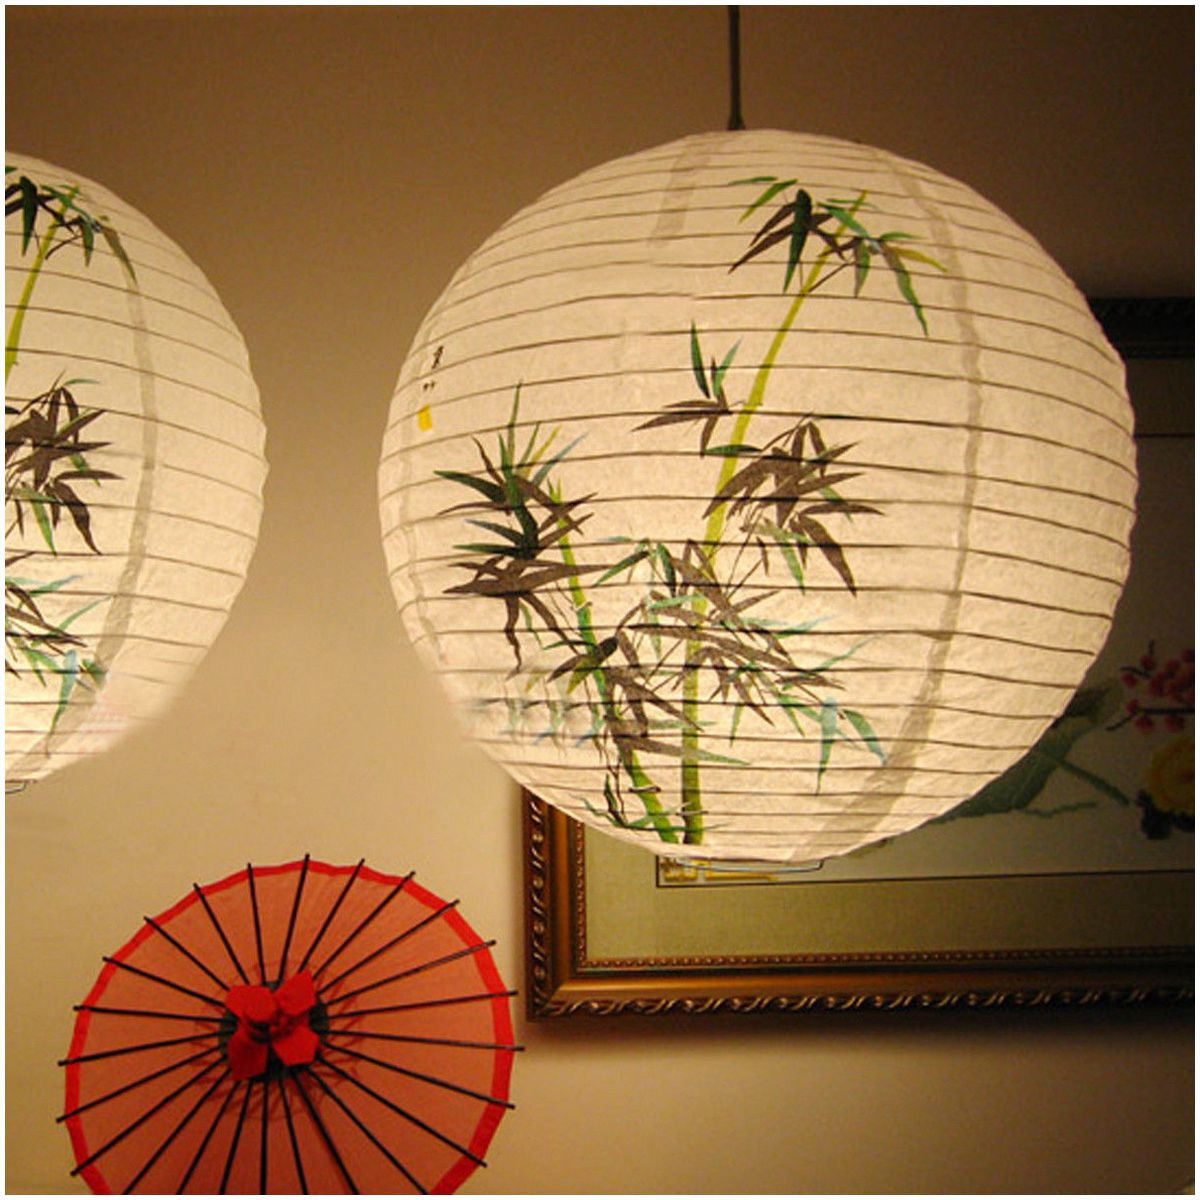 oriental vases for sale of alim hot sale 30cm lampshade paper lantern oriental style light for alim hot sale 30cm lampshade paper lantern oriental style light decoration chinese bamboo in lanterns from home garden on aliexpress com alibaba group